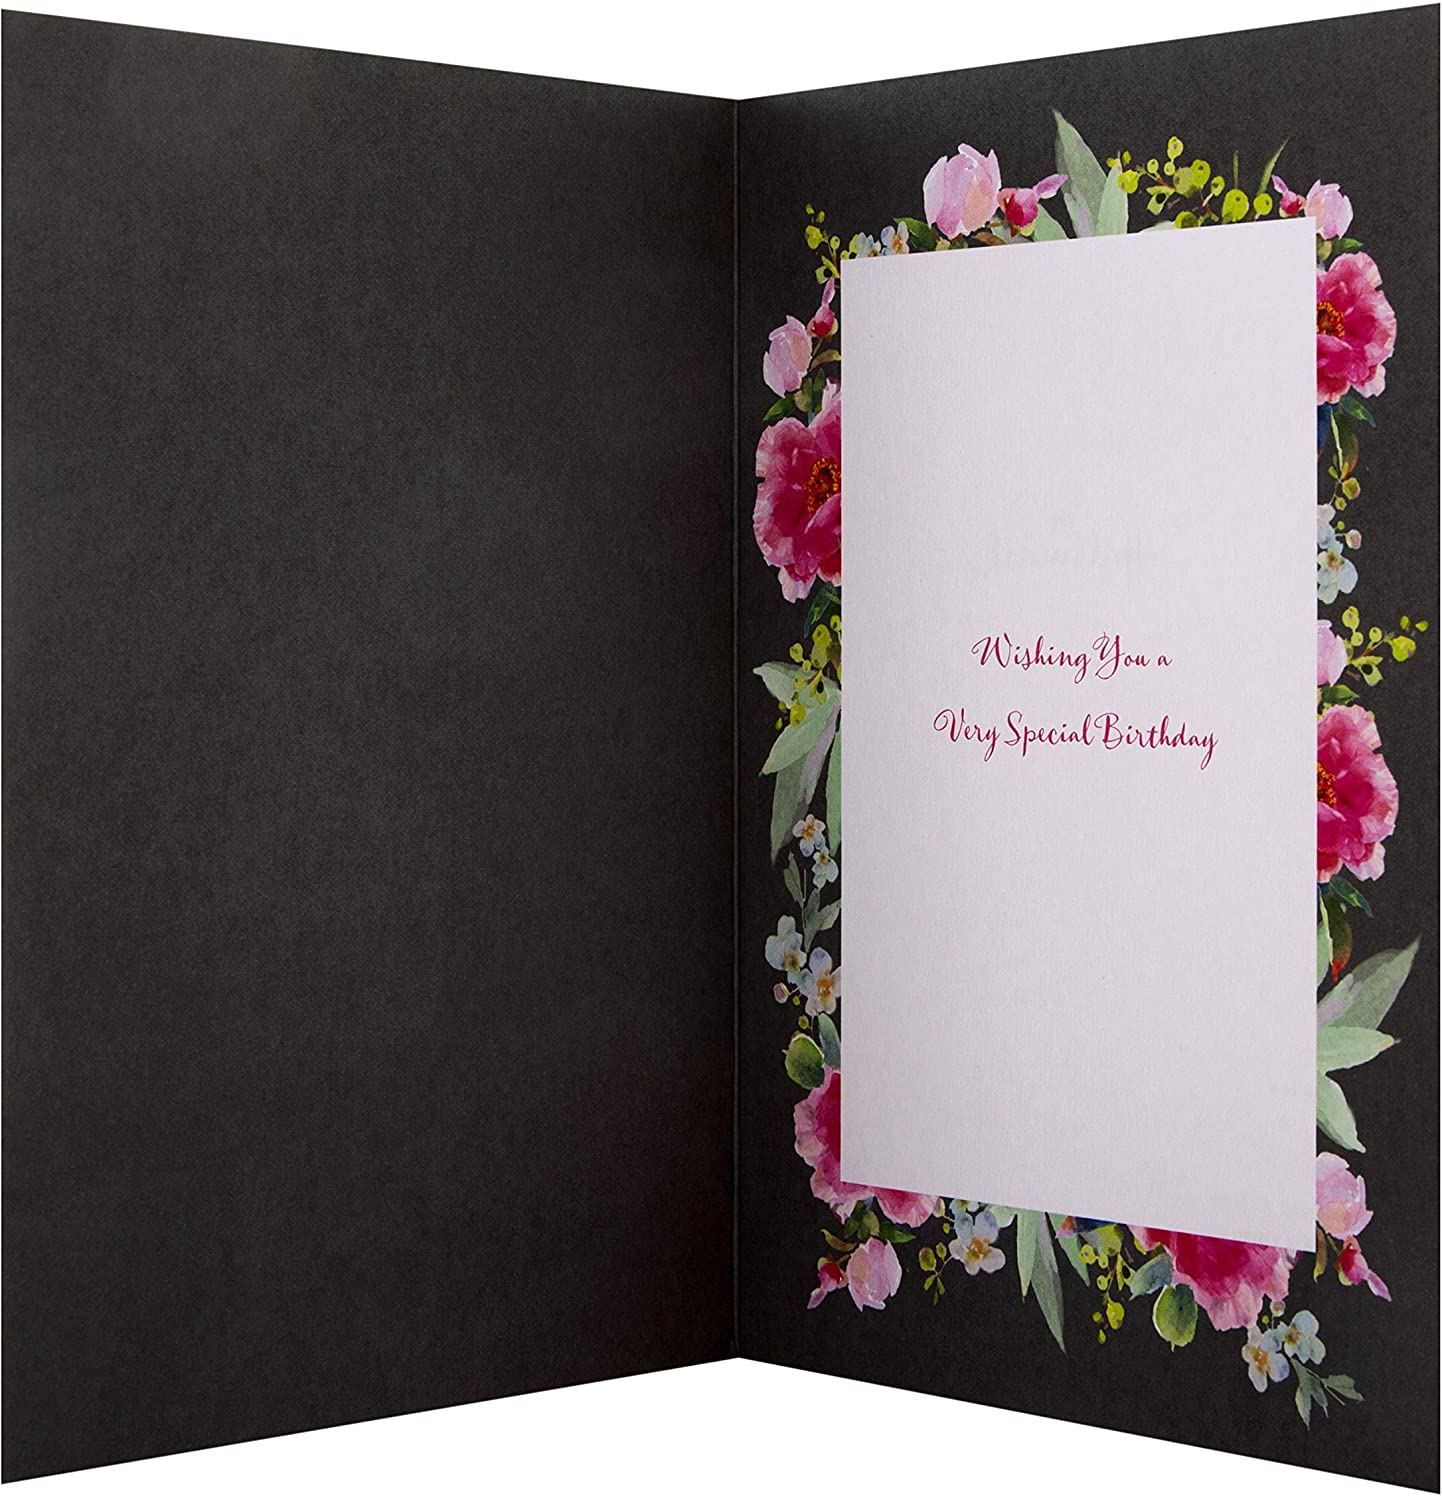 Classic Floral Design Daughter Birthday Card